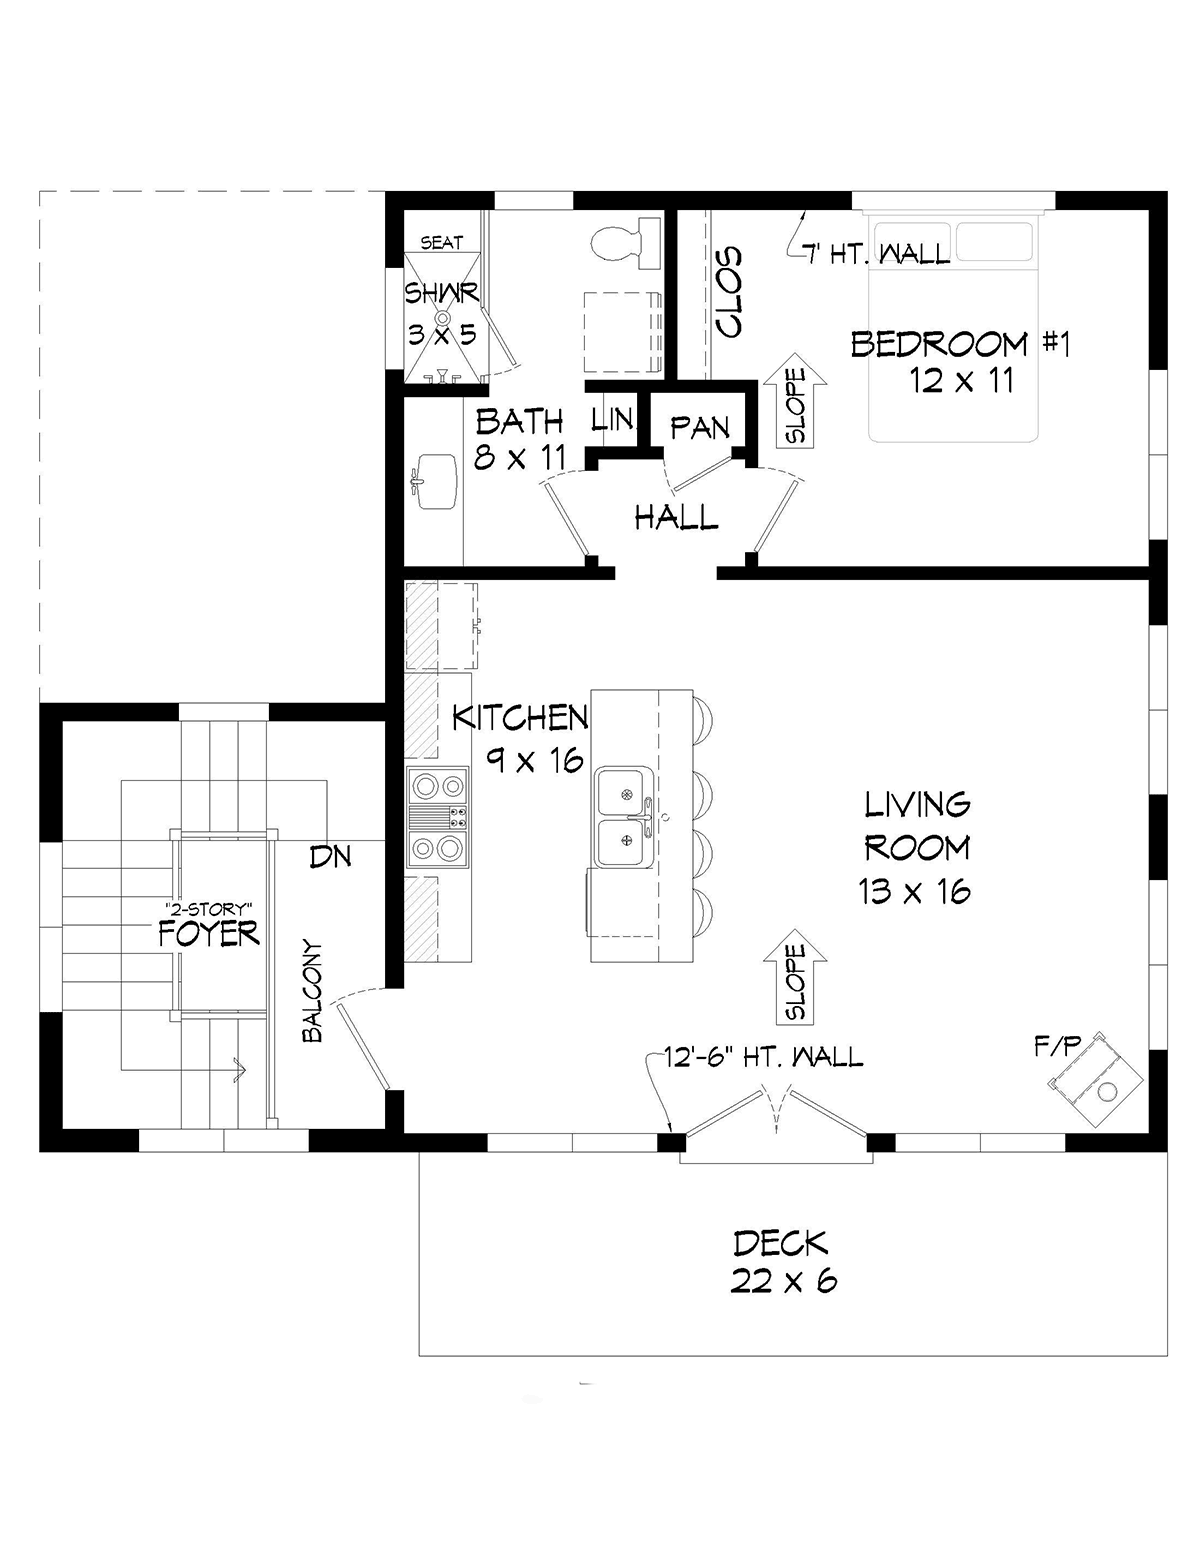 Contemporary, Modern House Plan 80989 with 1 Bed, 1 Bath, 3 Car Garage Level One